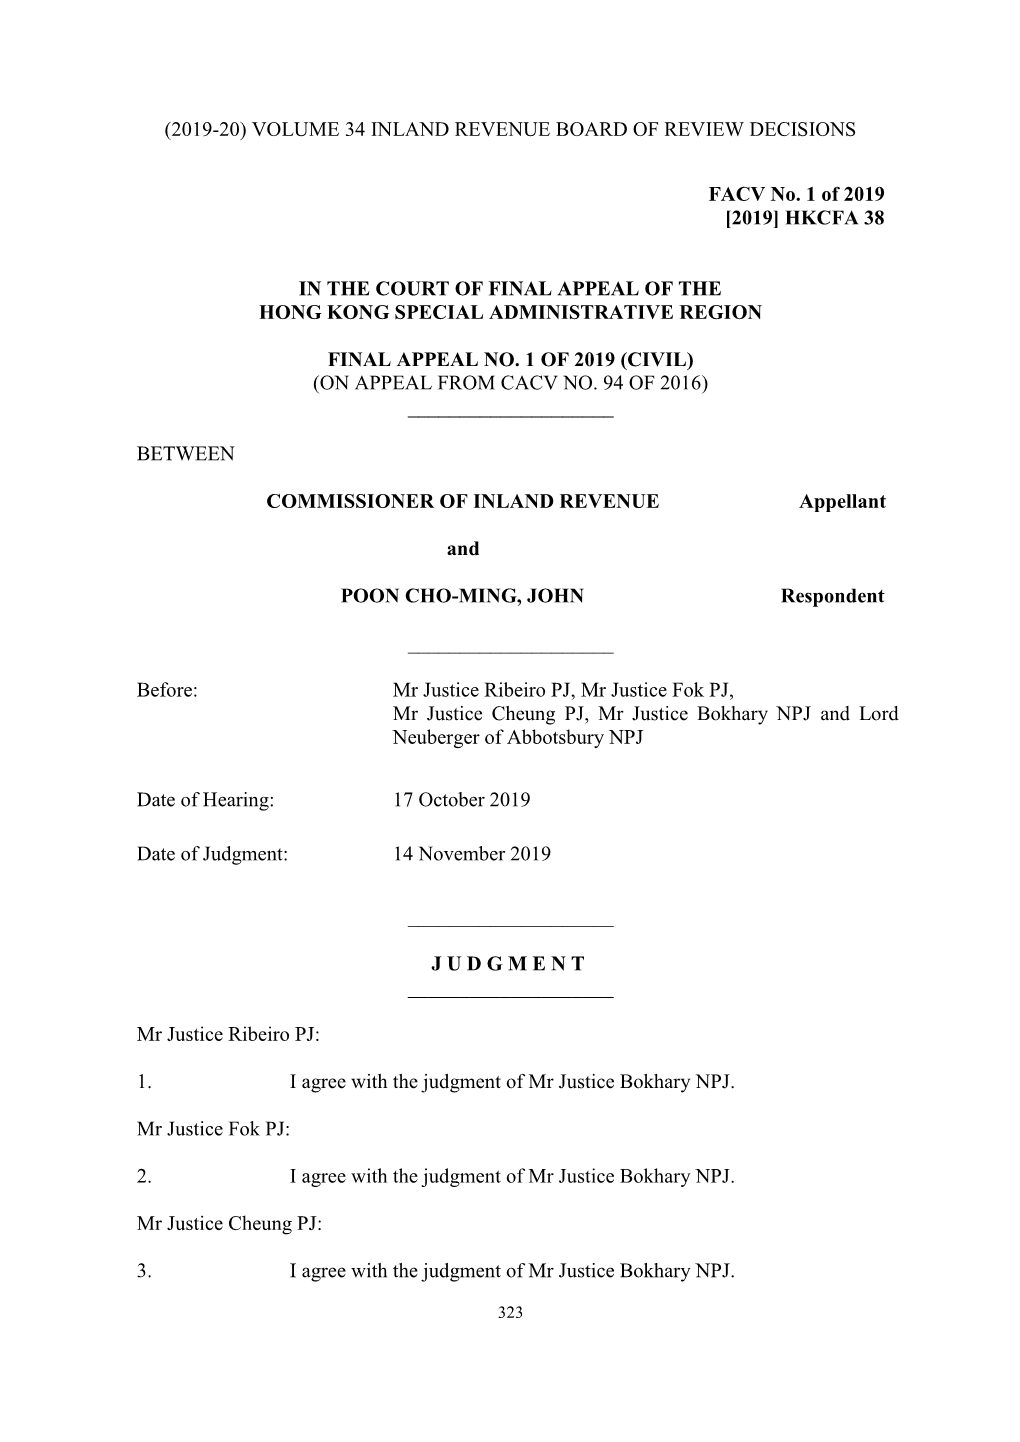 (2019-20) Volume 34 Inland Revenue Board of Review Decisions